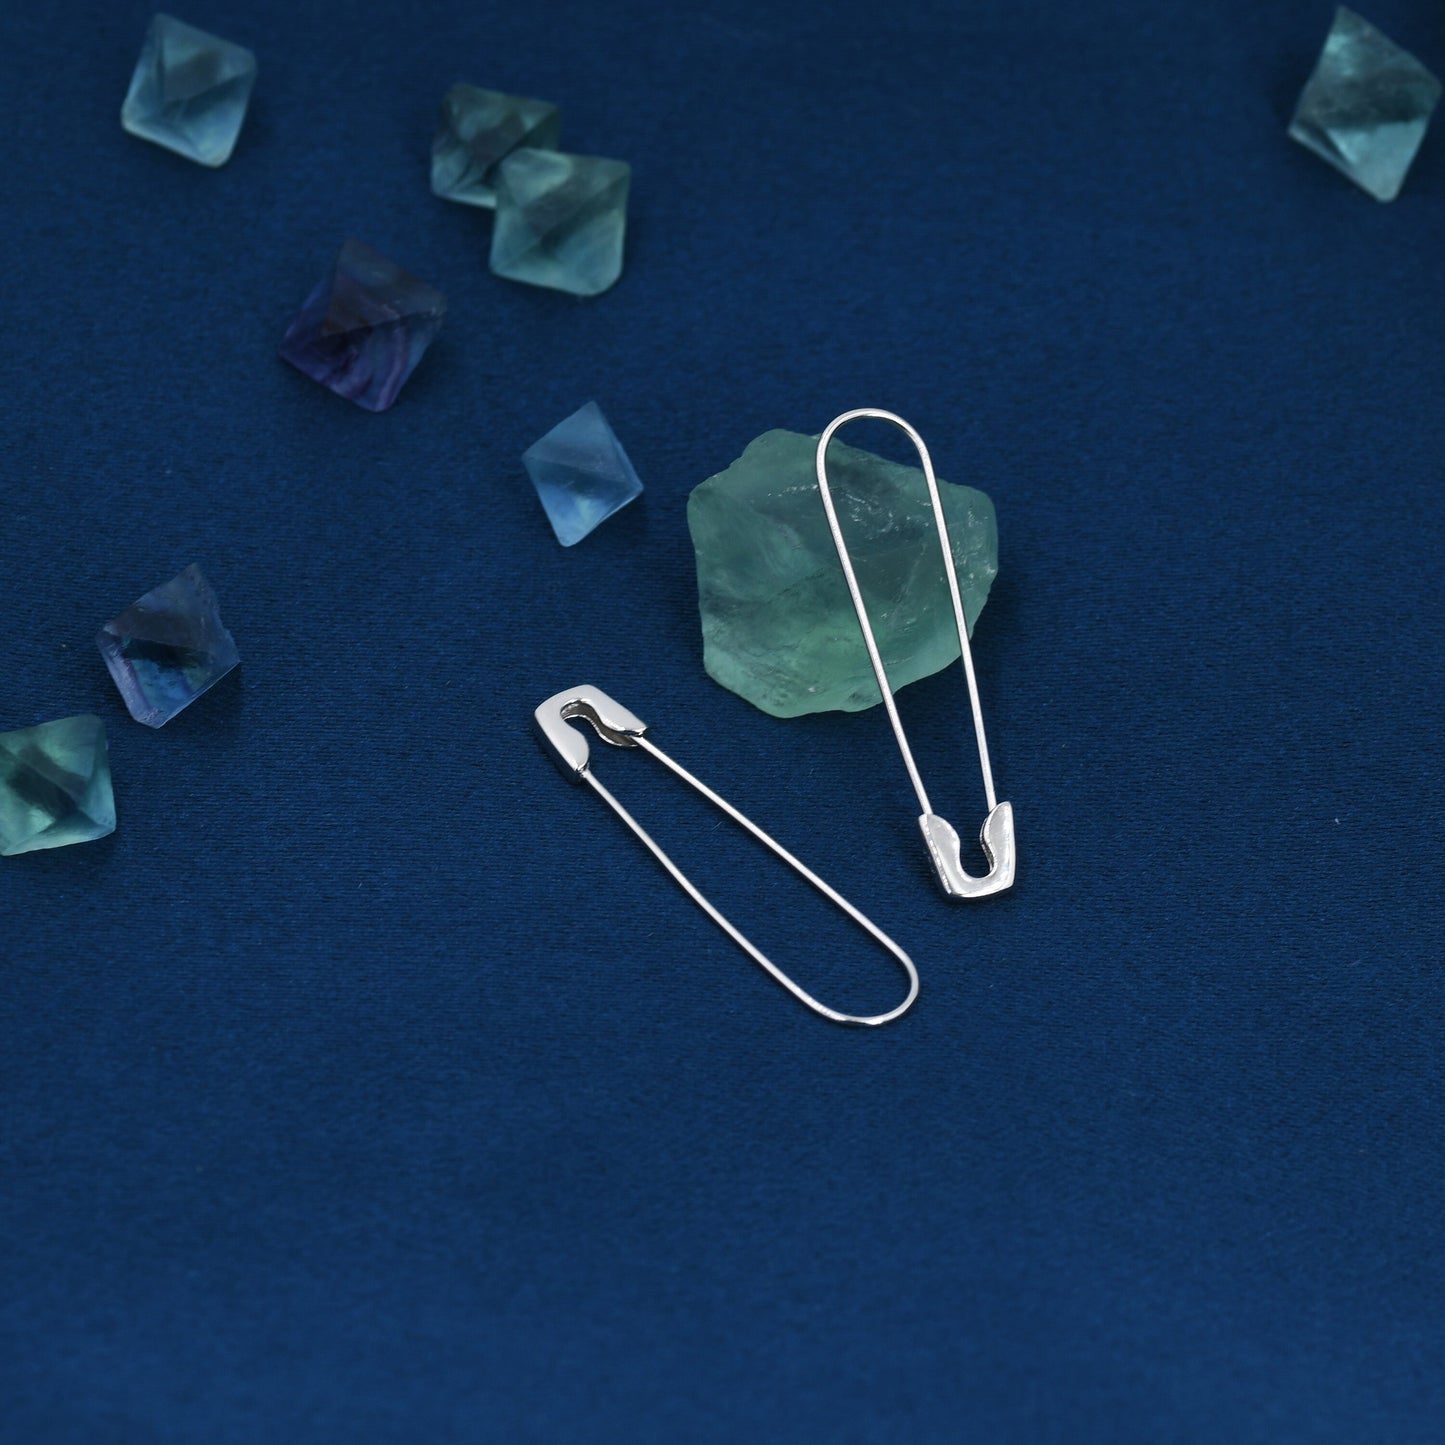 Safety Pin Pull Through Drop Earrings in Sterling Silver, Fun Quirky Punk Rock Jewellery